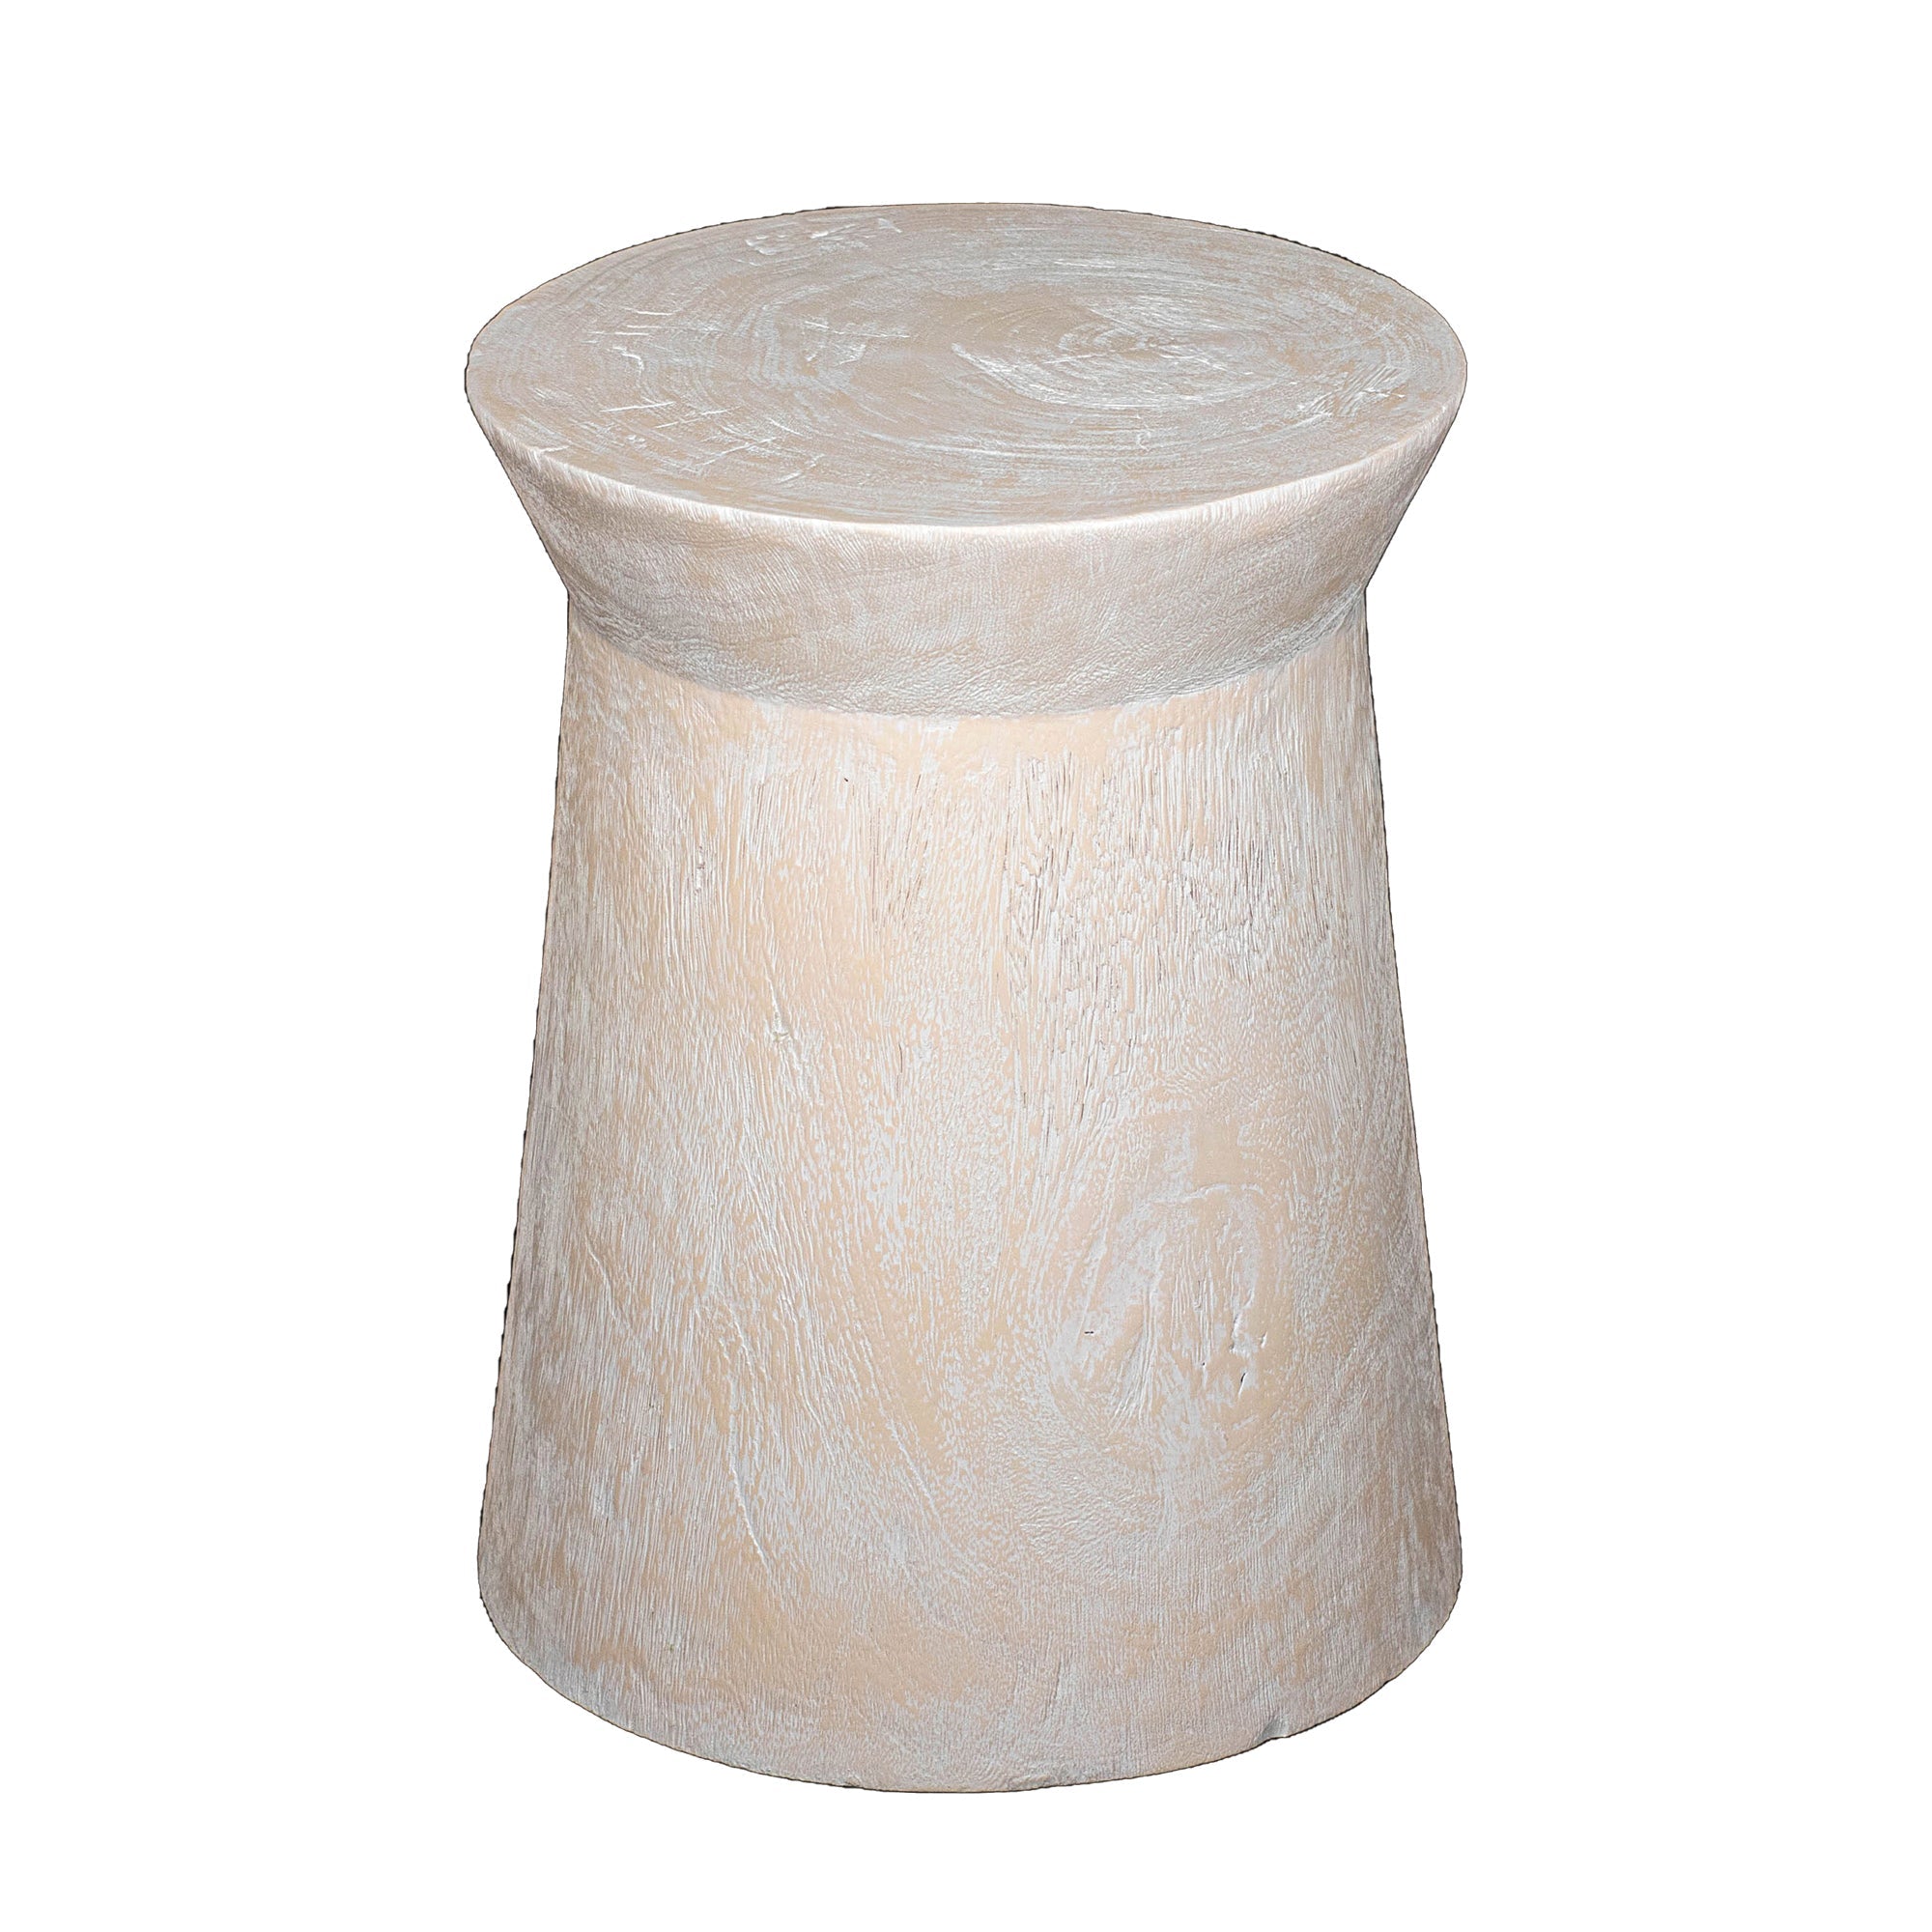 Tapered Solid Wood Round Pedestal Side Table